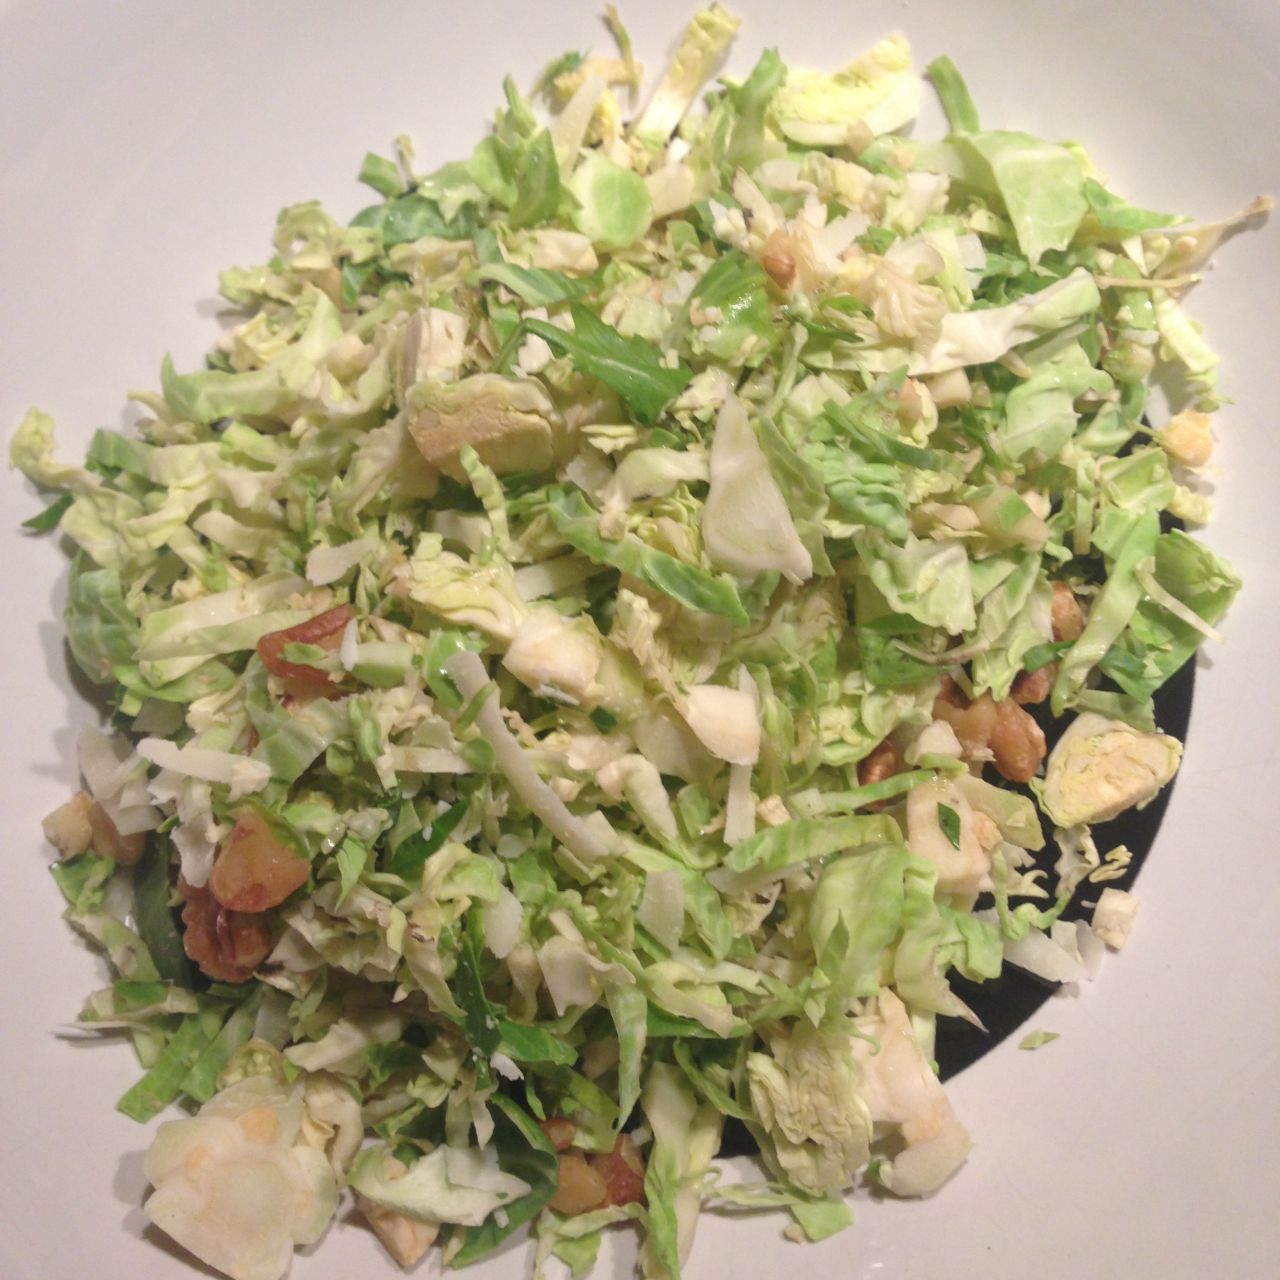 Broccolino, Brooklyn, New York: Brussels sprout salad (delivery, dressing on the side)